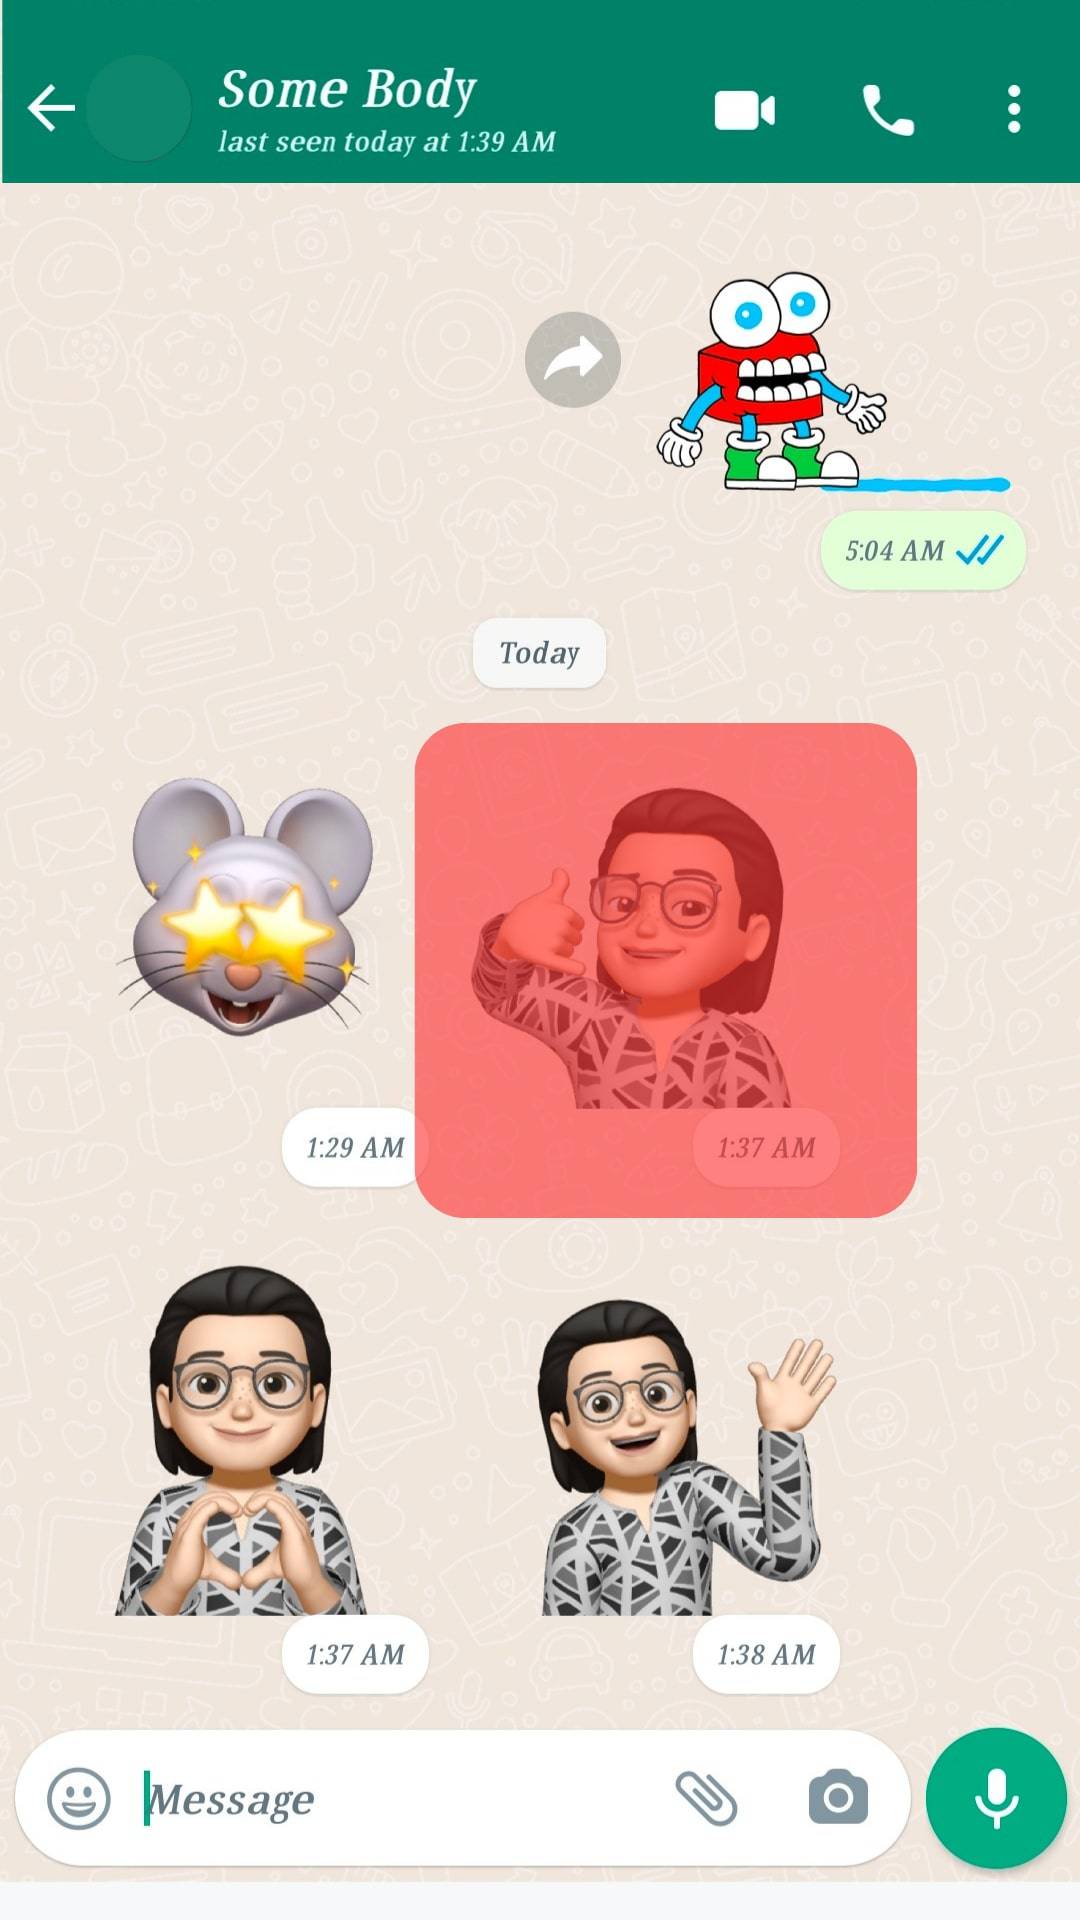 Tap On The Memoji Received From An Ios User.